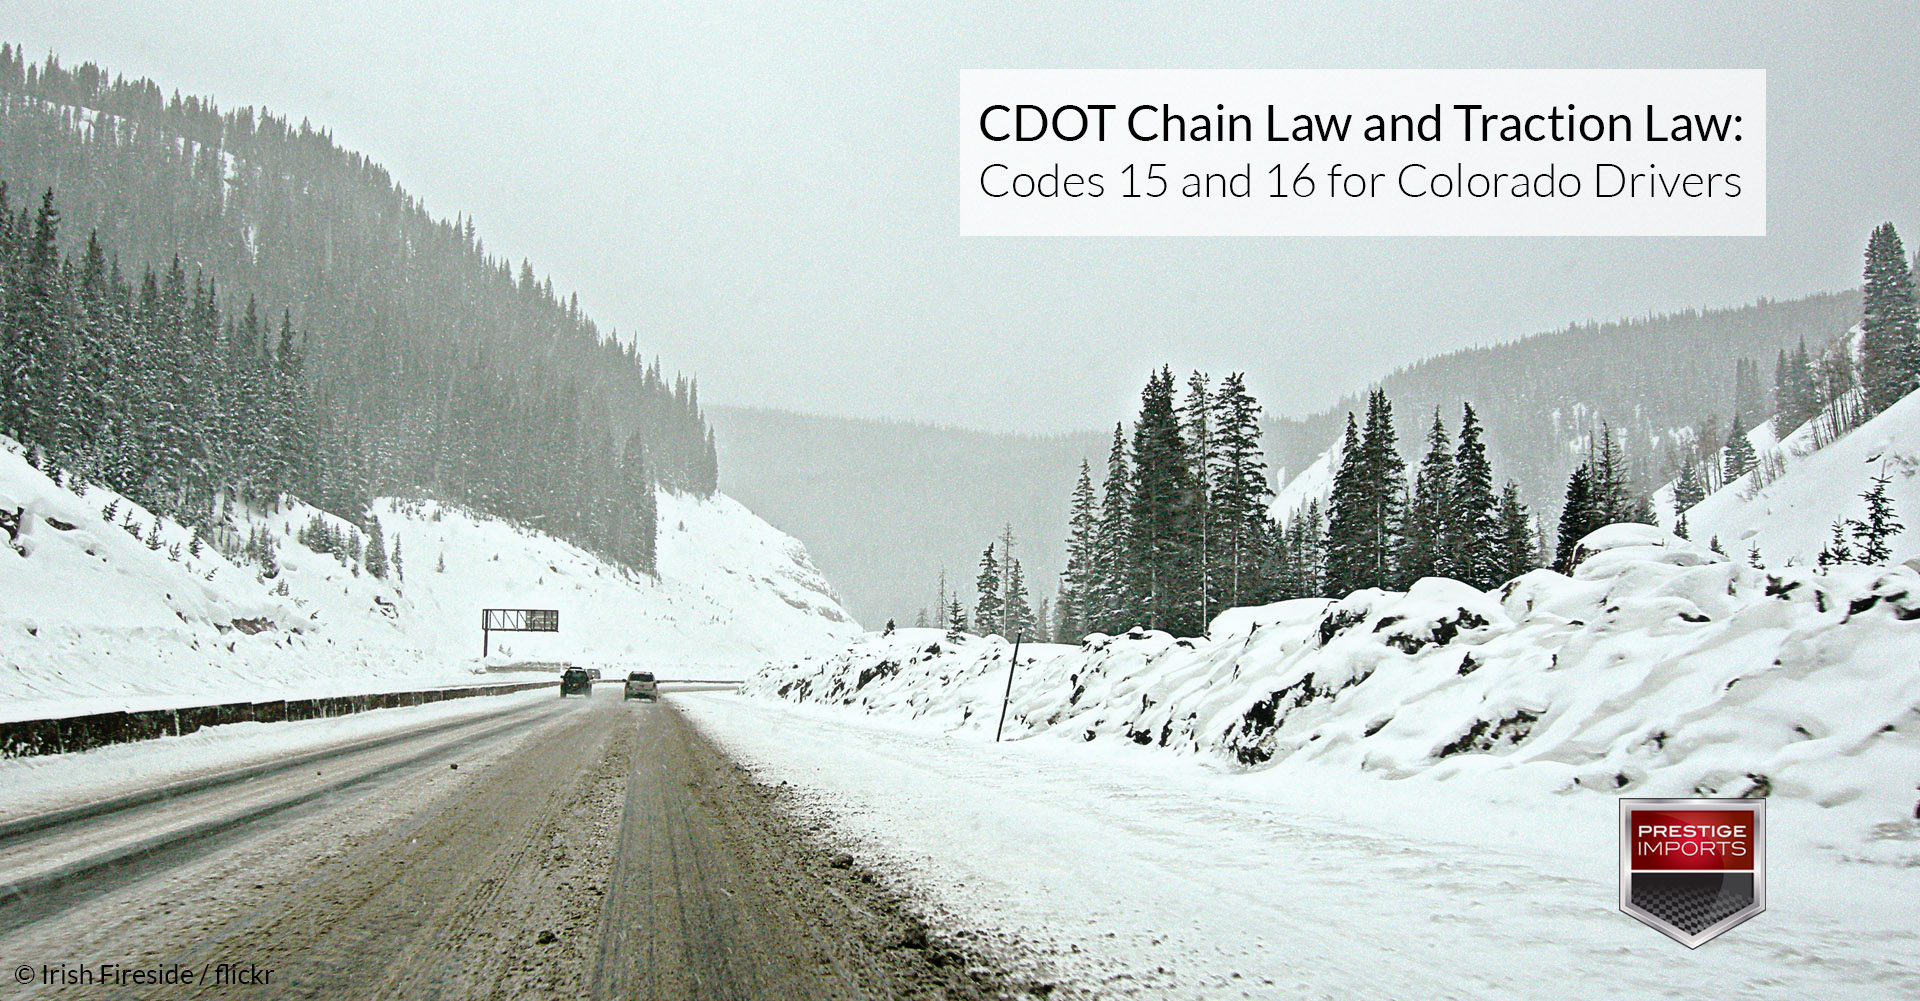 I-70 in the Colorado Mountains covered in snow and ice - CDOT Chain Law and Traction Law - Codes 15 and 16 for Colorado Drivers